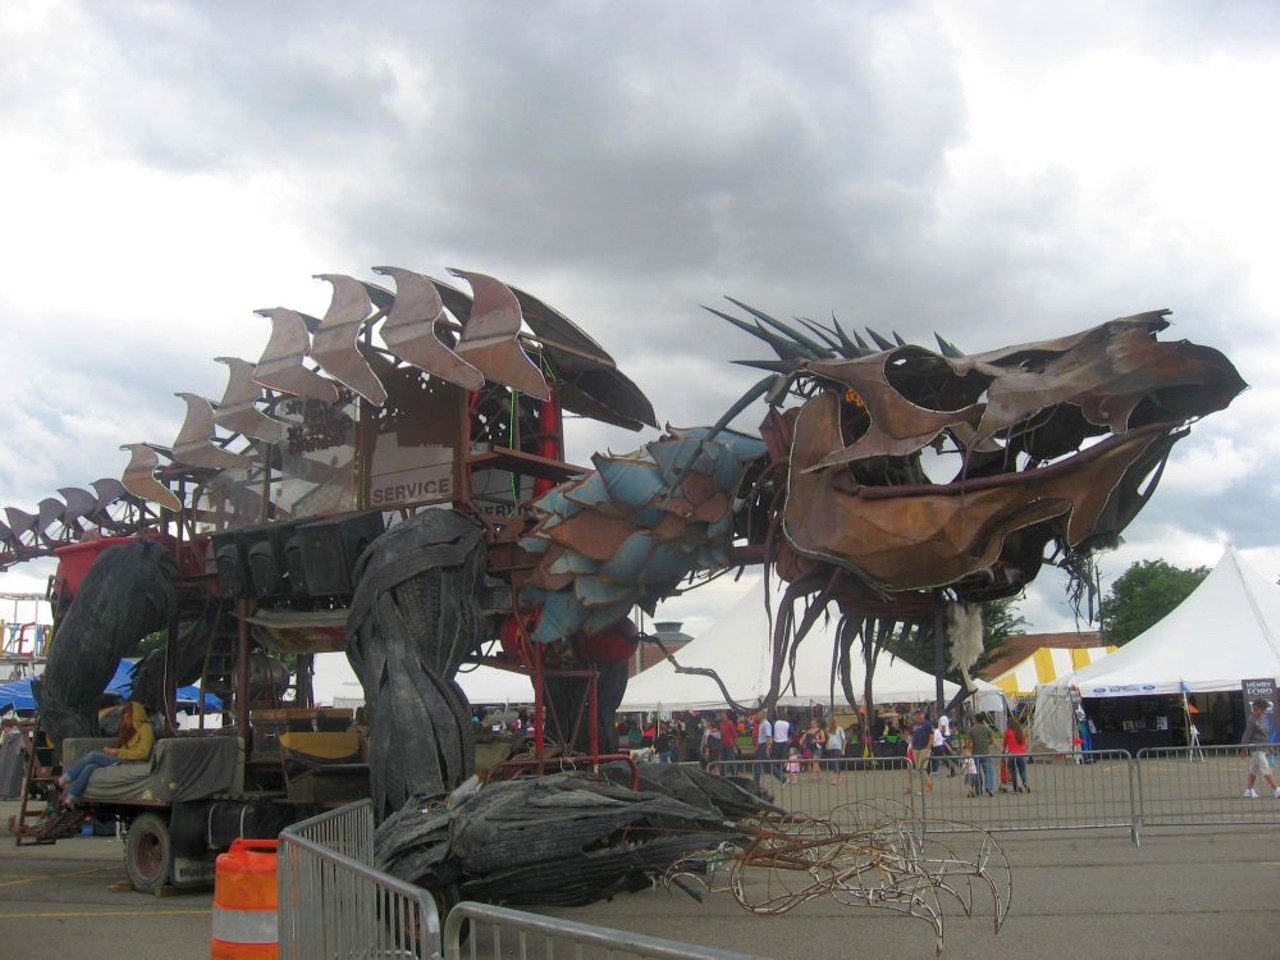 Didn't fight enough with your family on the way to the faire? Here try to steer this thing.